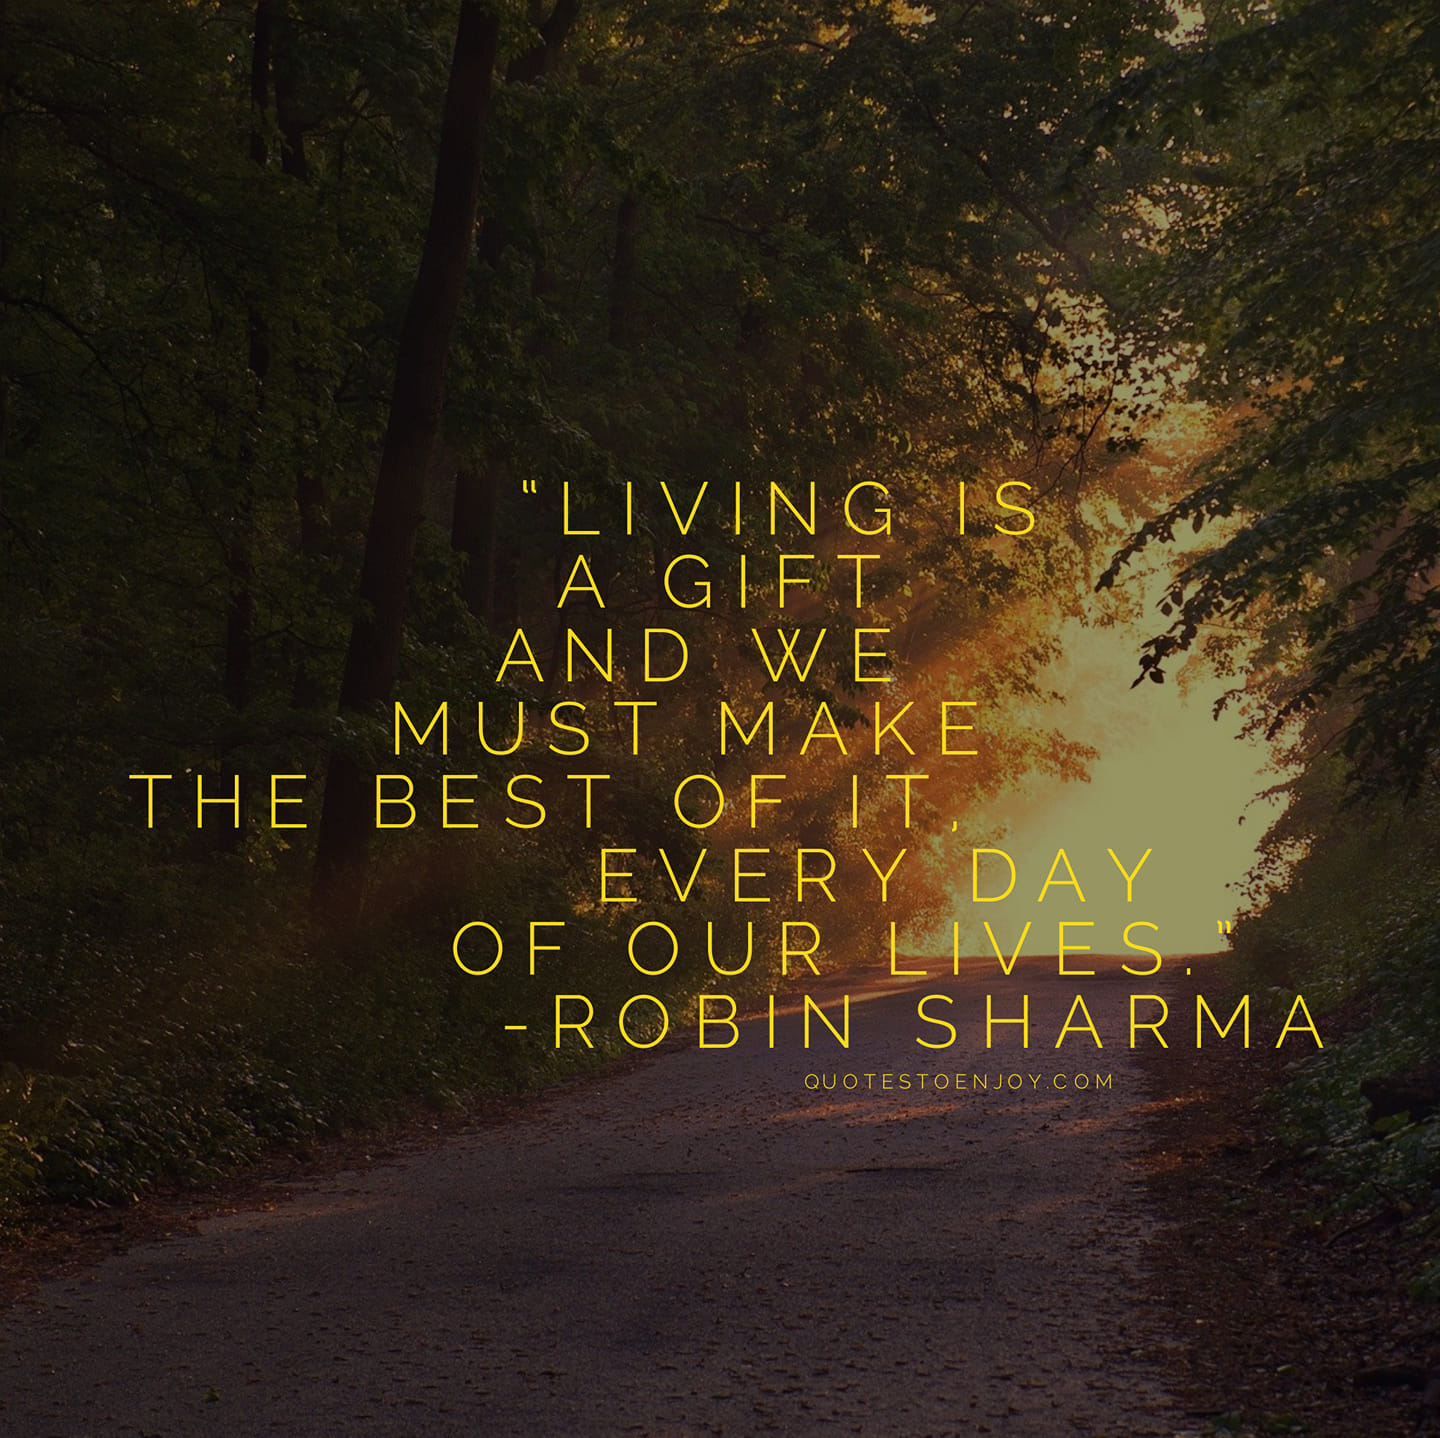 Living is a gift and we must make the best of it, every... - Robin Sharma